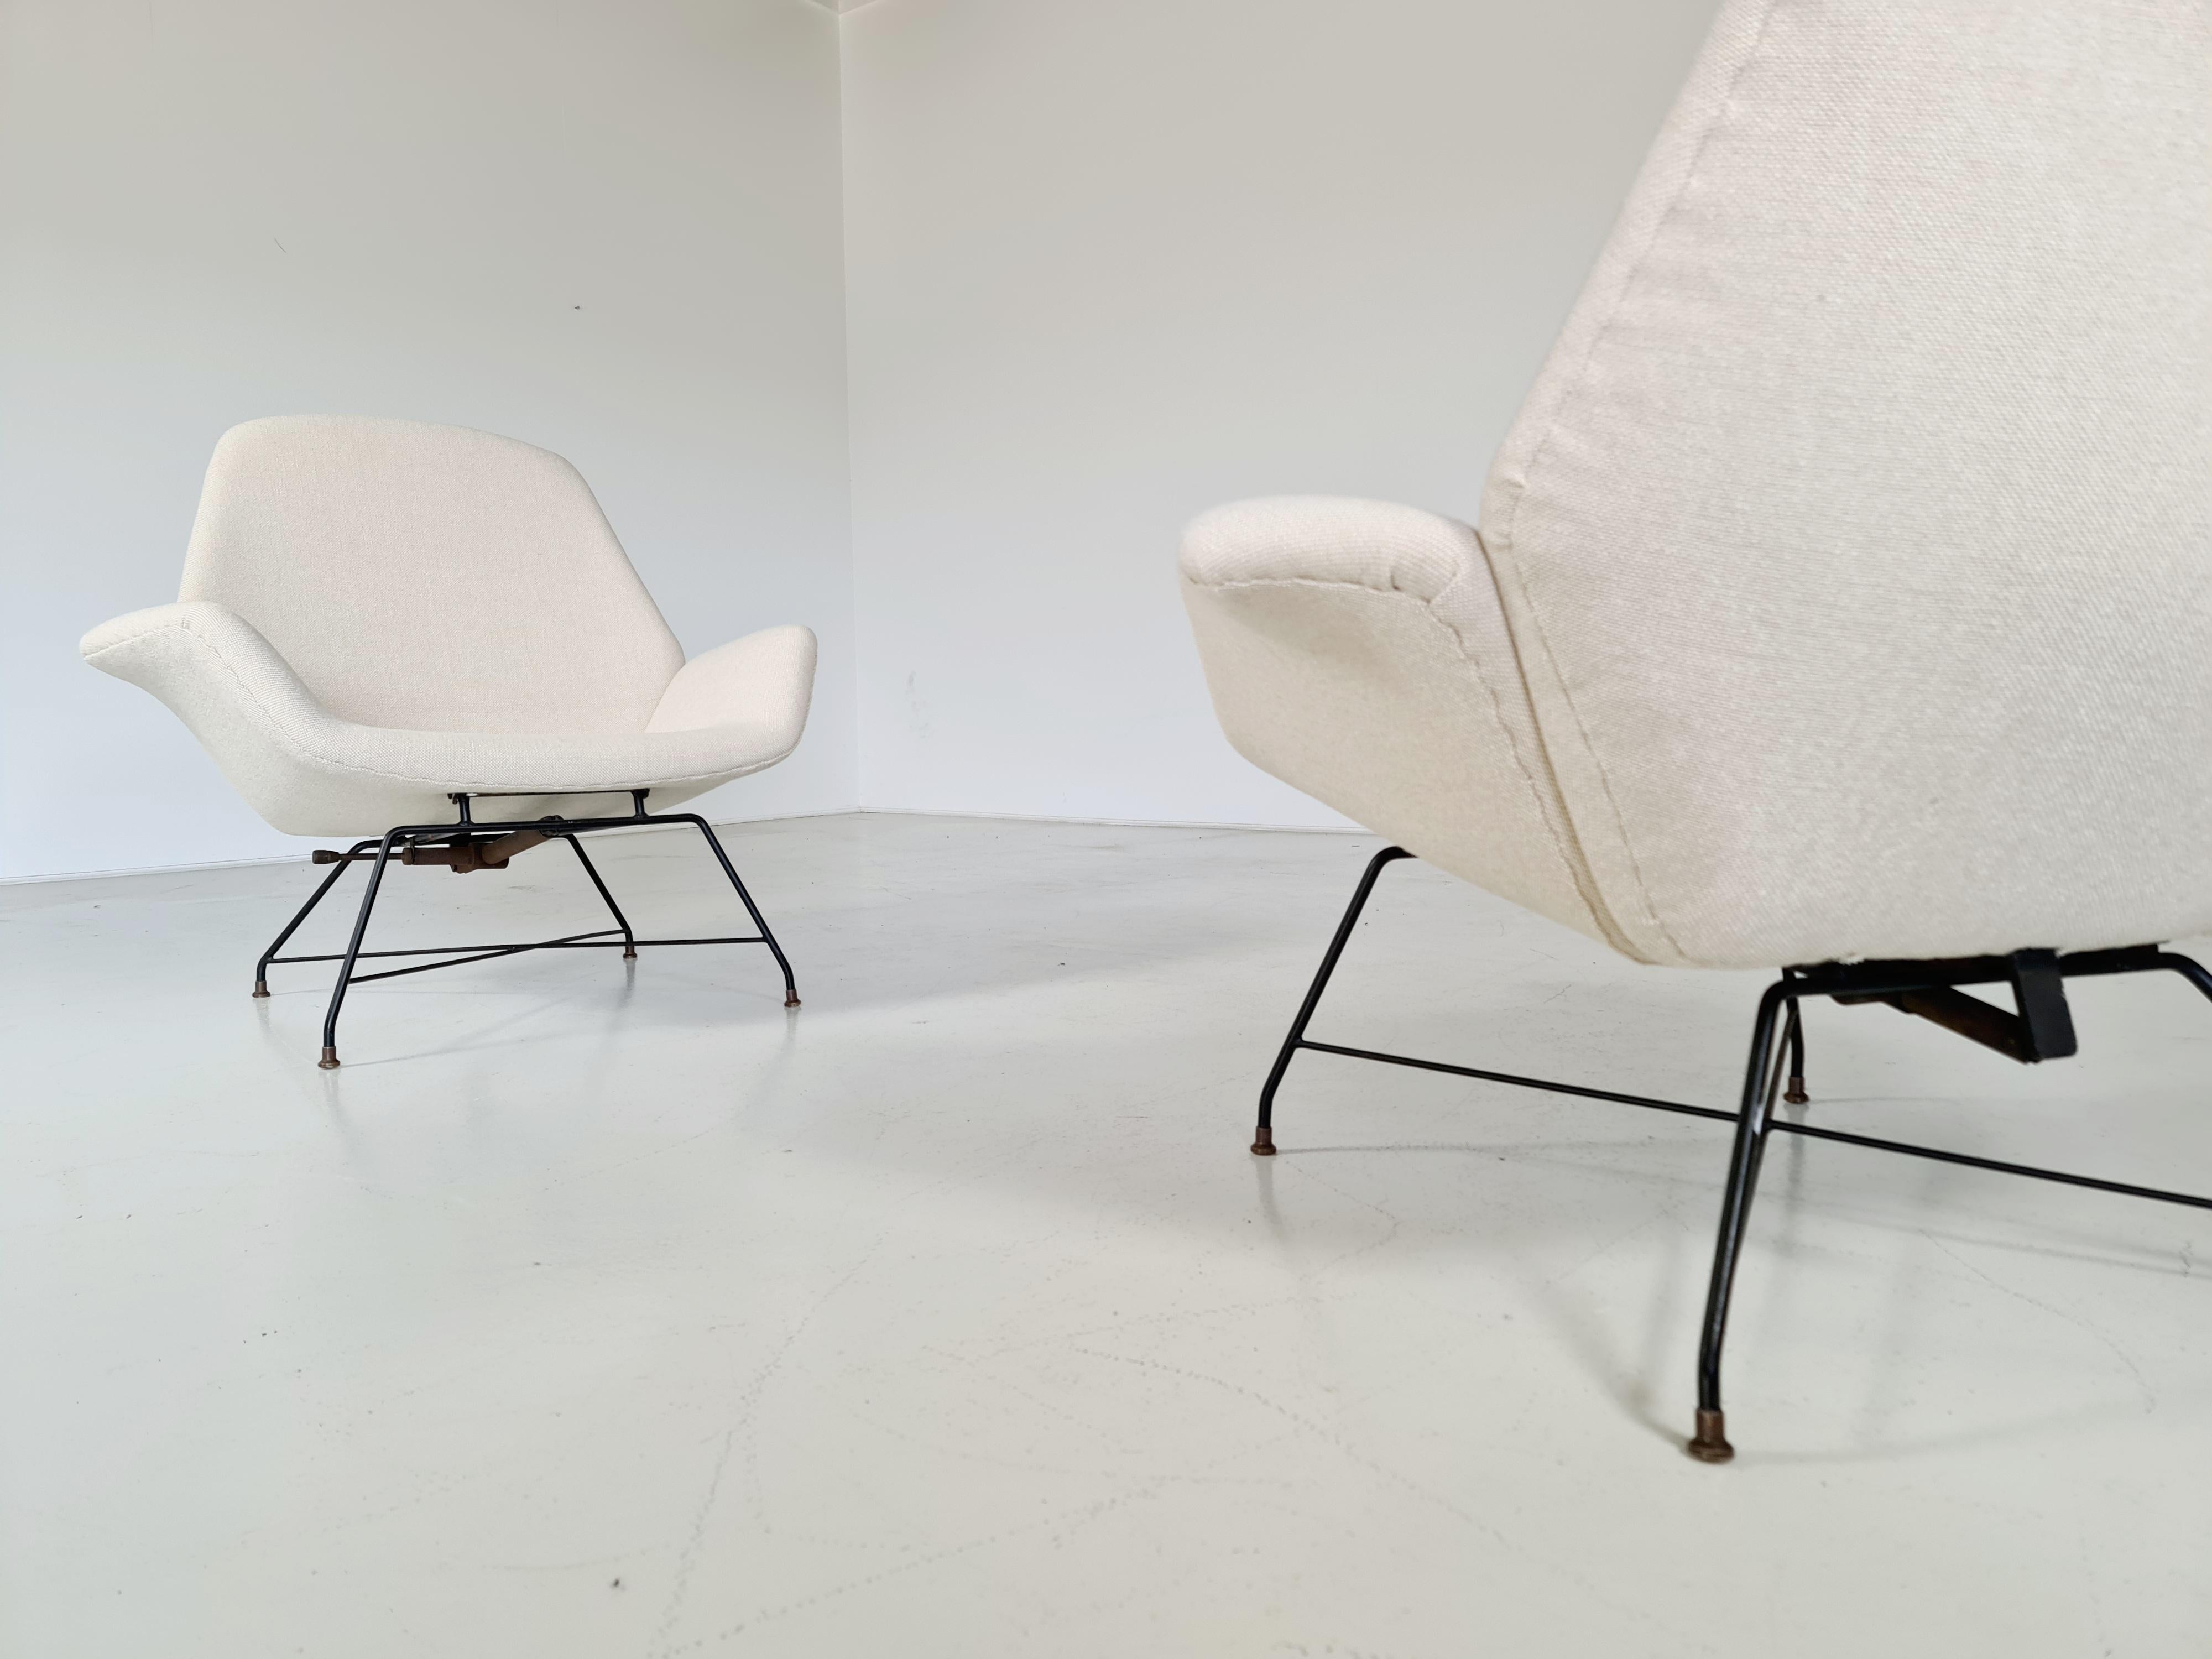 Wool ‘Lotus’ Lounge Chairs in cream wool fabric by Augusto Bozzi for Saporiti, 1960s For Sale